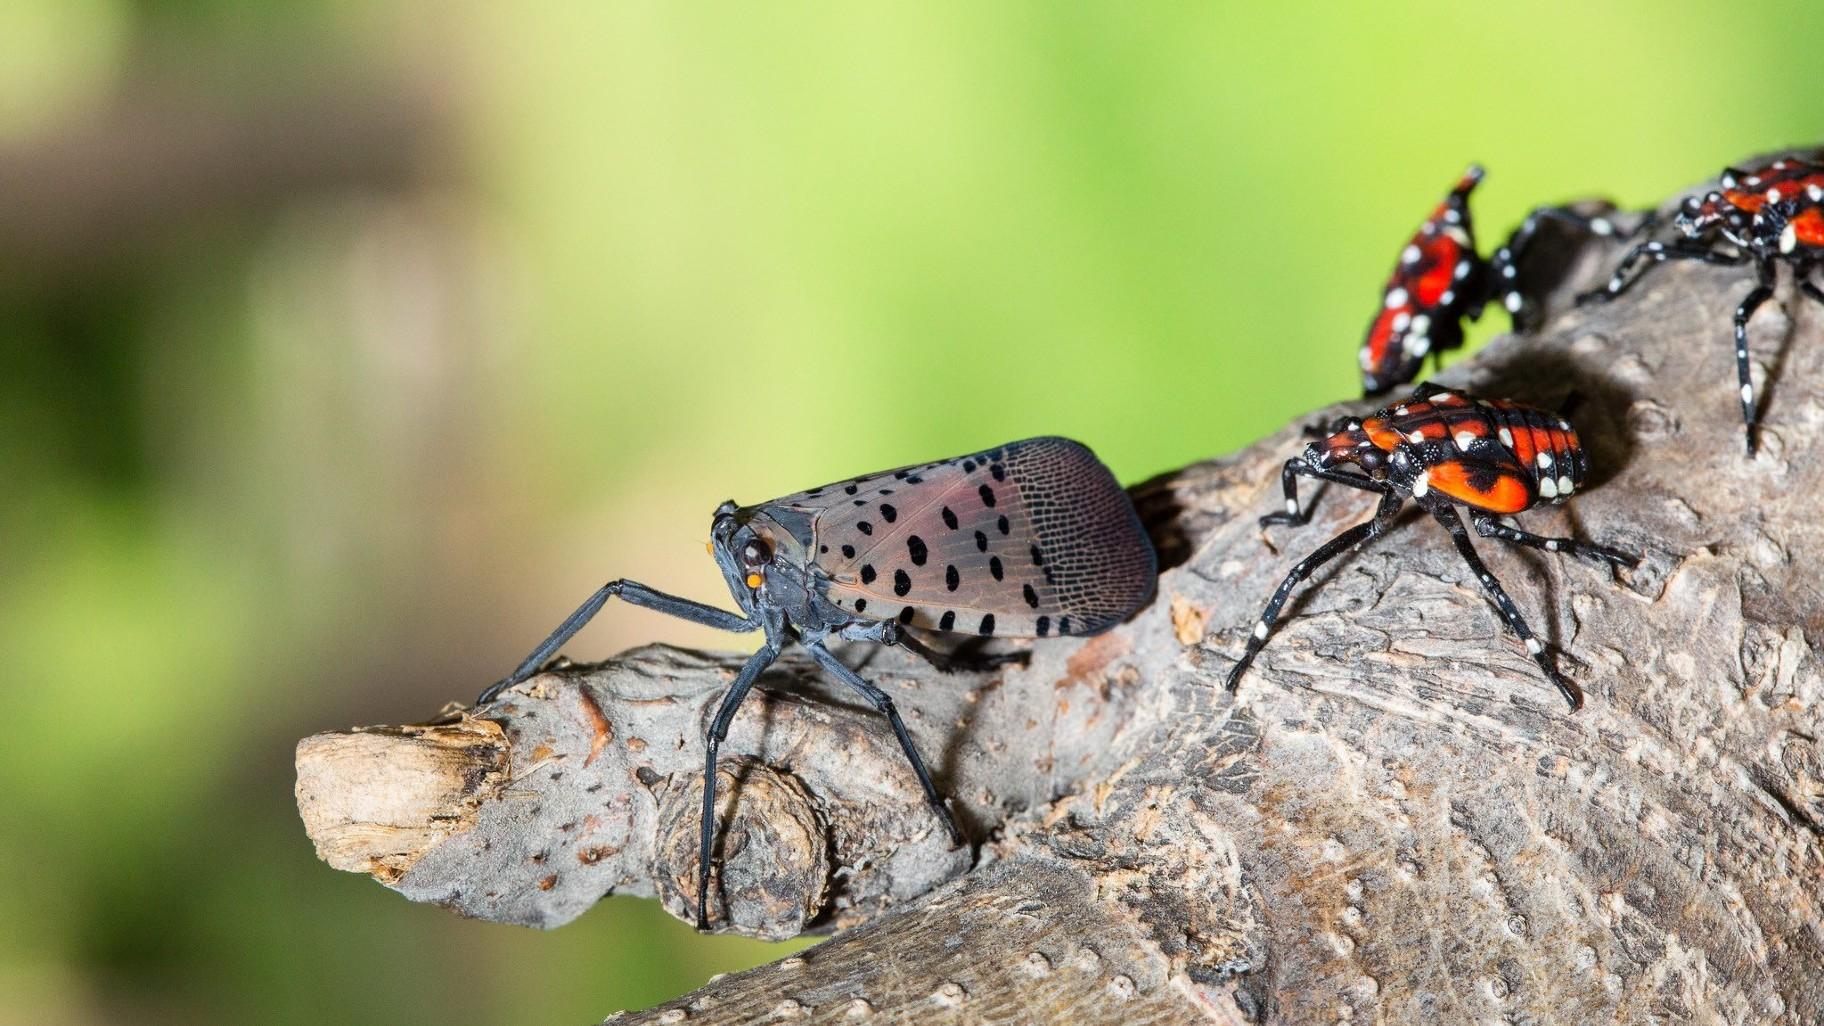 Spotted Lanternfly Isn’t an Eco Disaster But It Does Have a Major ‘Yuck’ Factor. Here’s How Chicago Can Defend Itself